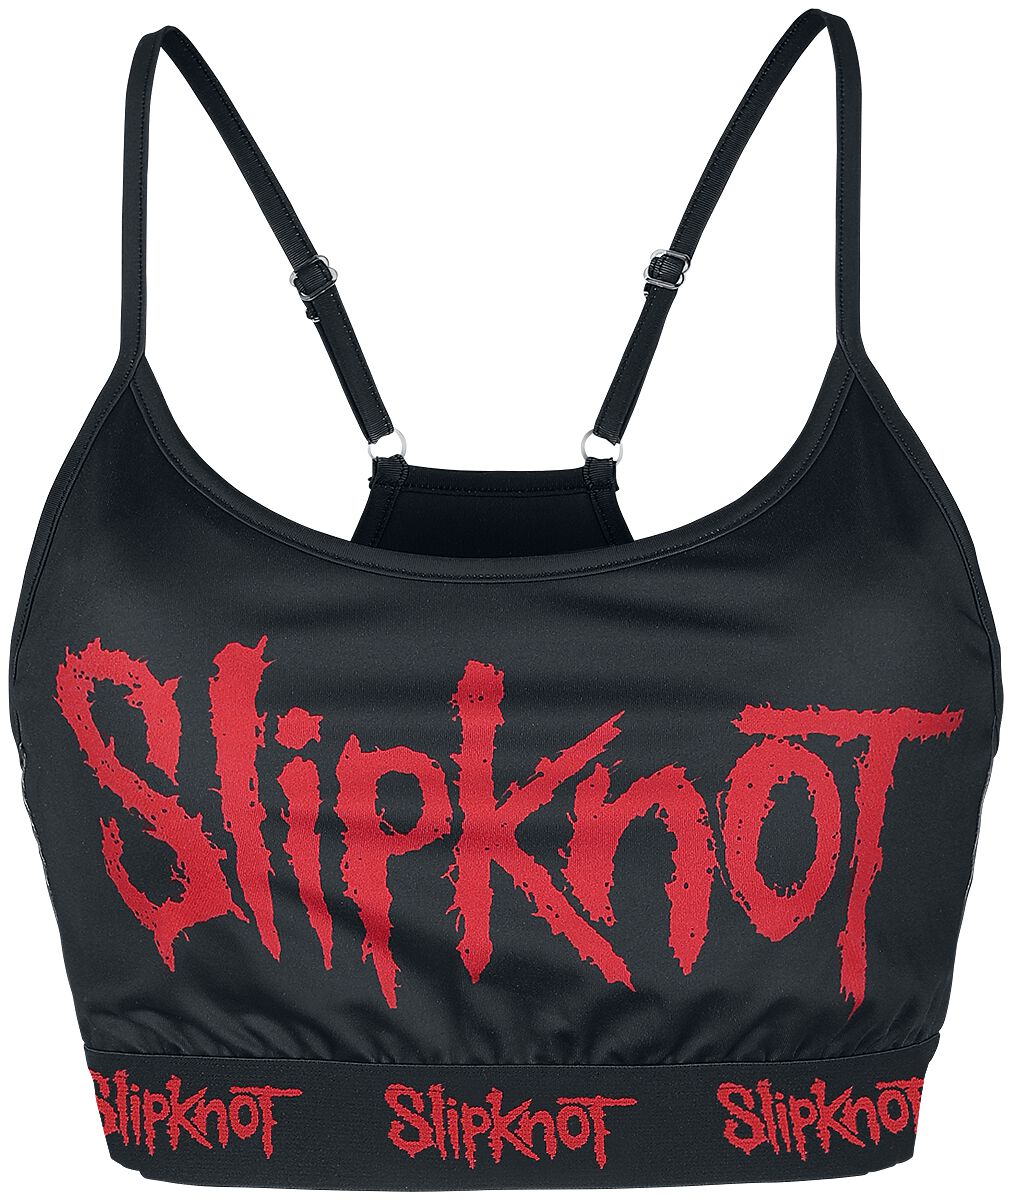 Image of Bustier di Slipknot - EMP Signature Collection - S a XXL - Donna - nero/rosso